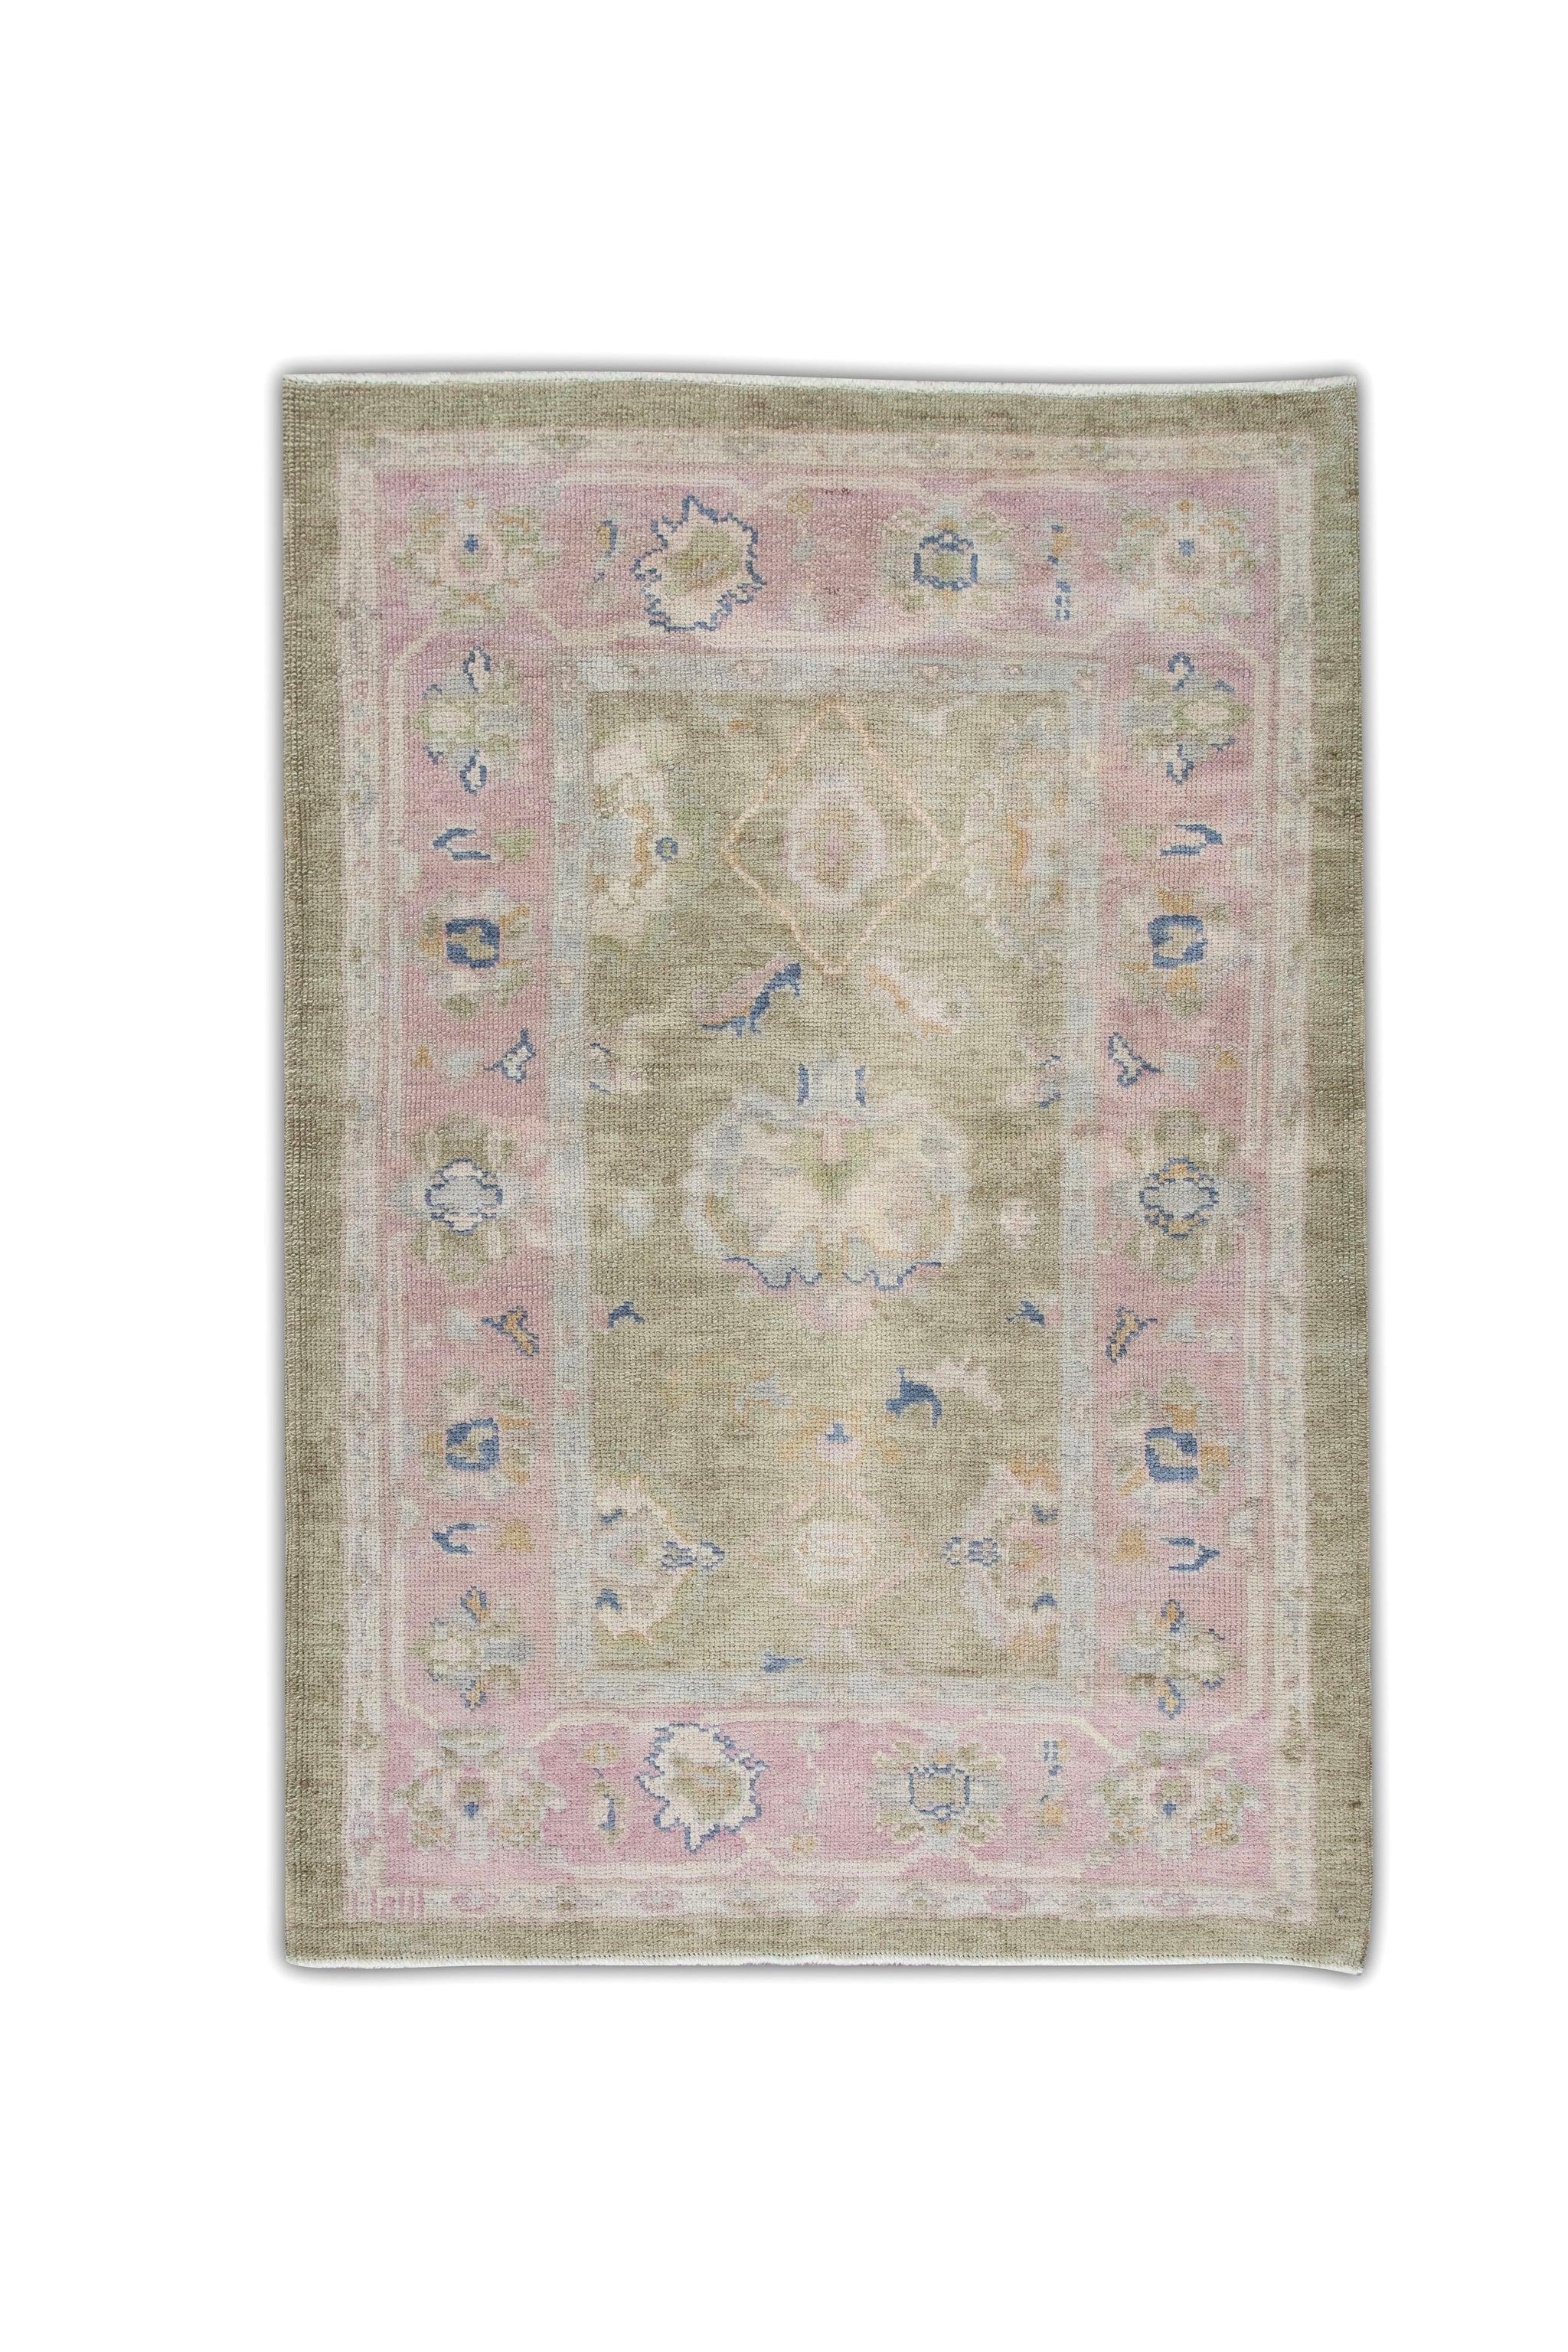 Vegetable Dyed Olive Green and Pink Floral Design Handwoven Wool Turkish Oushak Rug 4'1